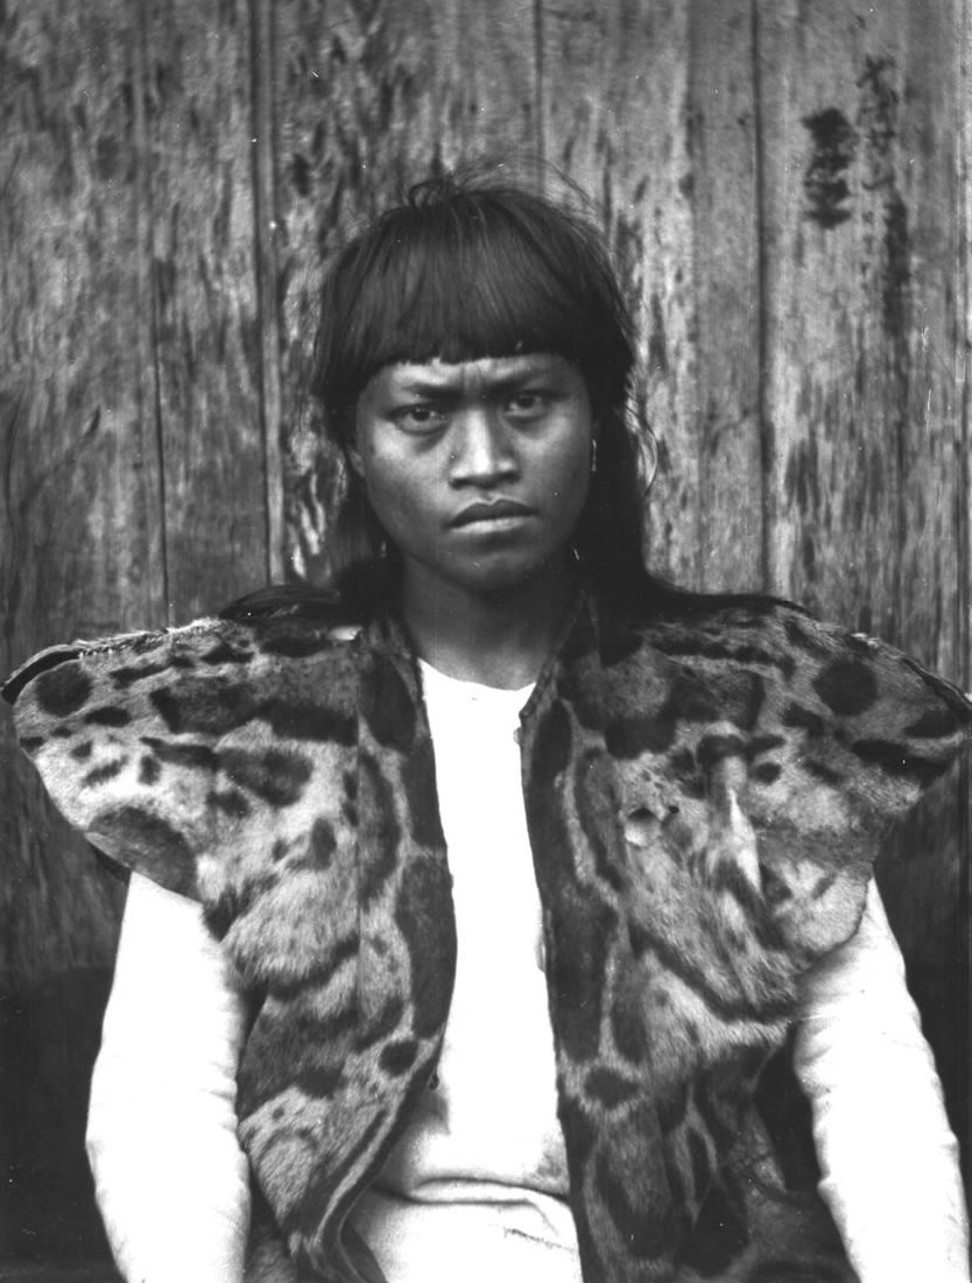 A photograph by Japanese anthropologist Torii Ryuzo, circa 1900, shows a Taiwanese Aboriginal in a vest made from a clouded leopard pelt.